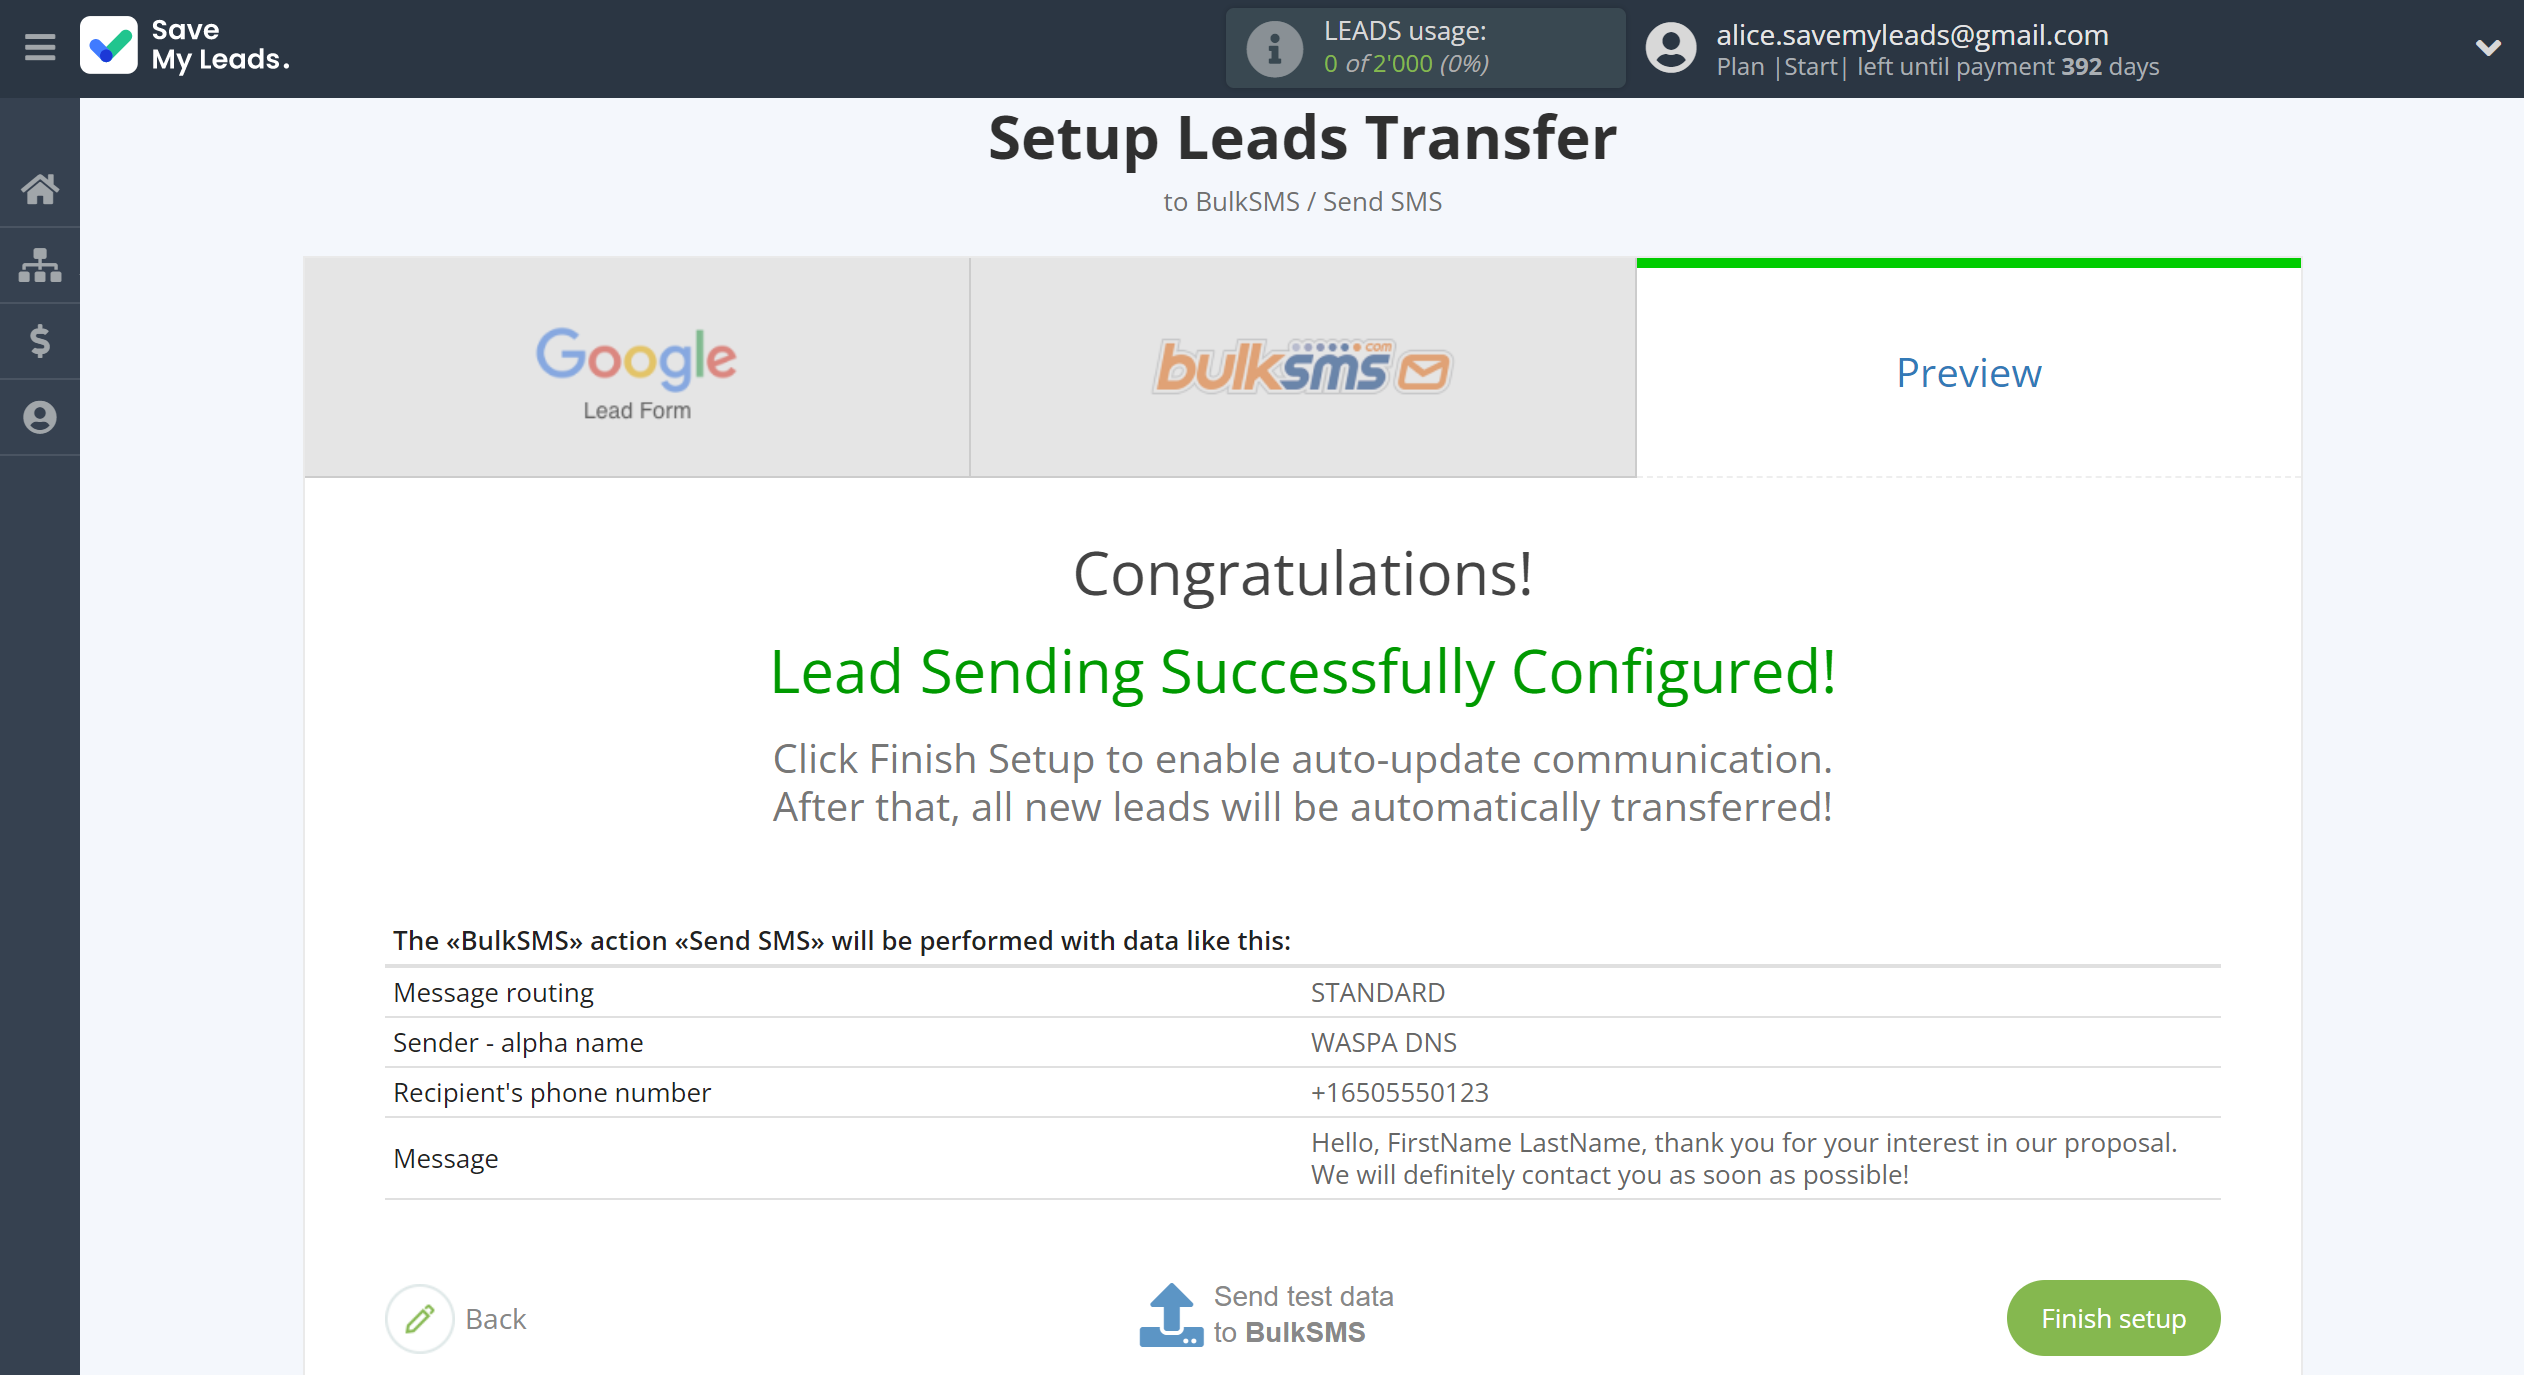 How to Connect Google Lead Form with BulkSMS | Test data